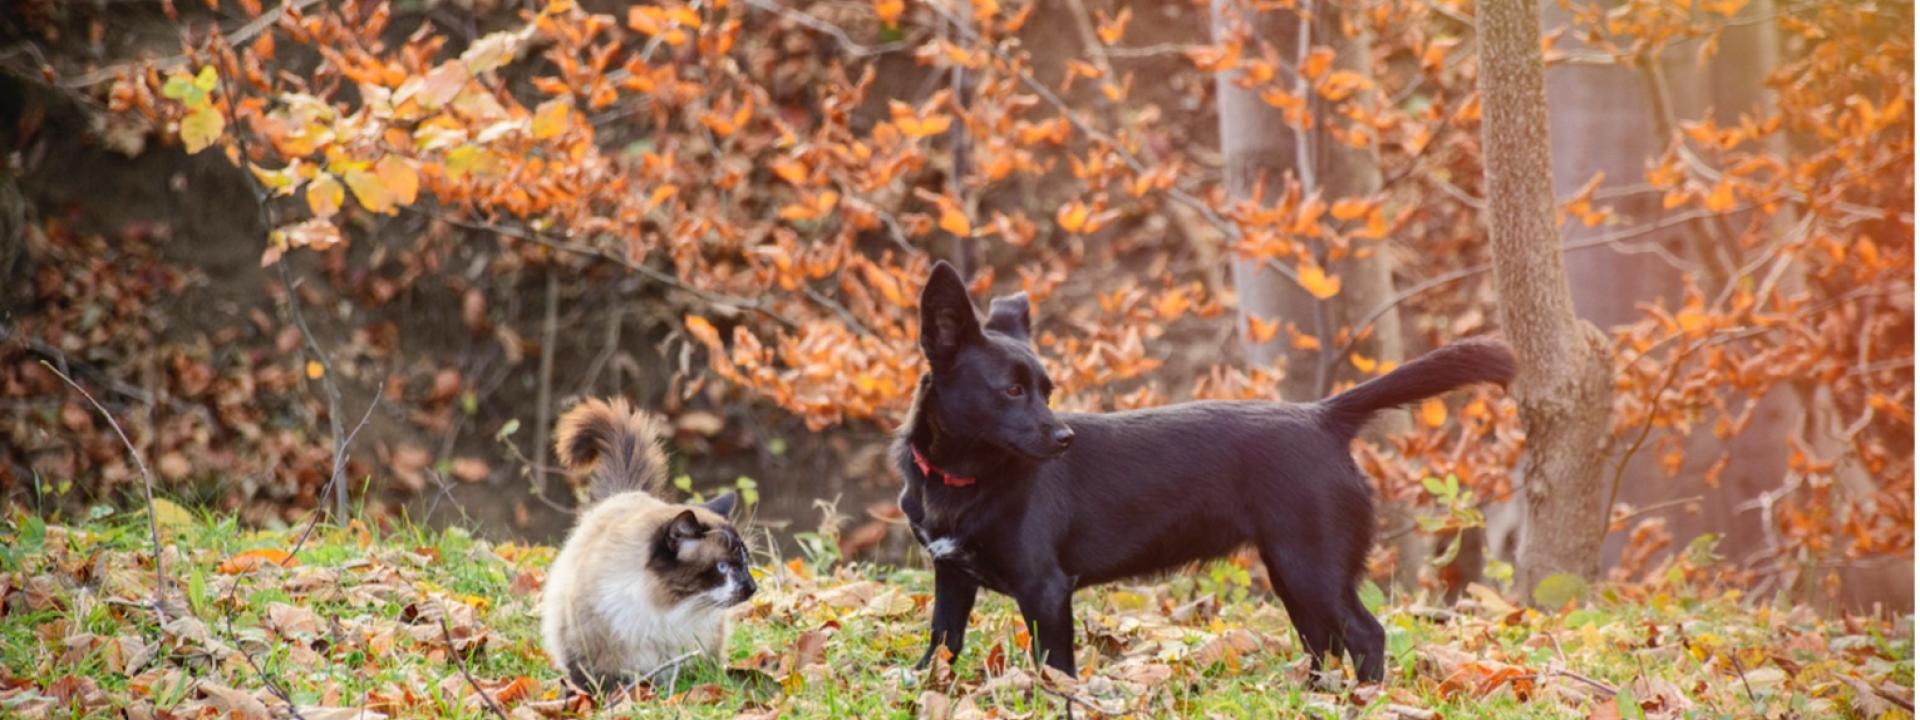 Dog and cat standing on lawn, fall colors, leaves.